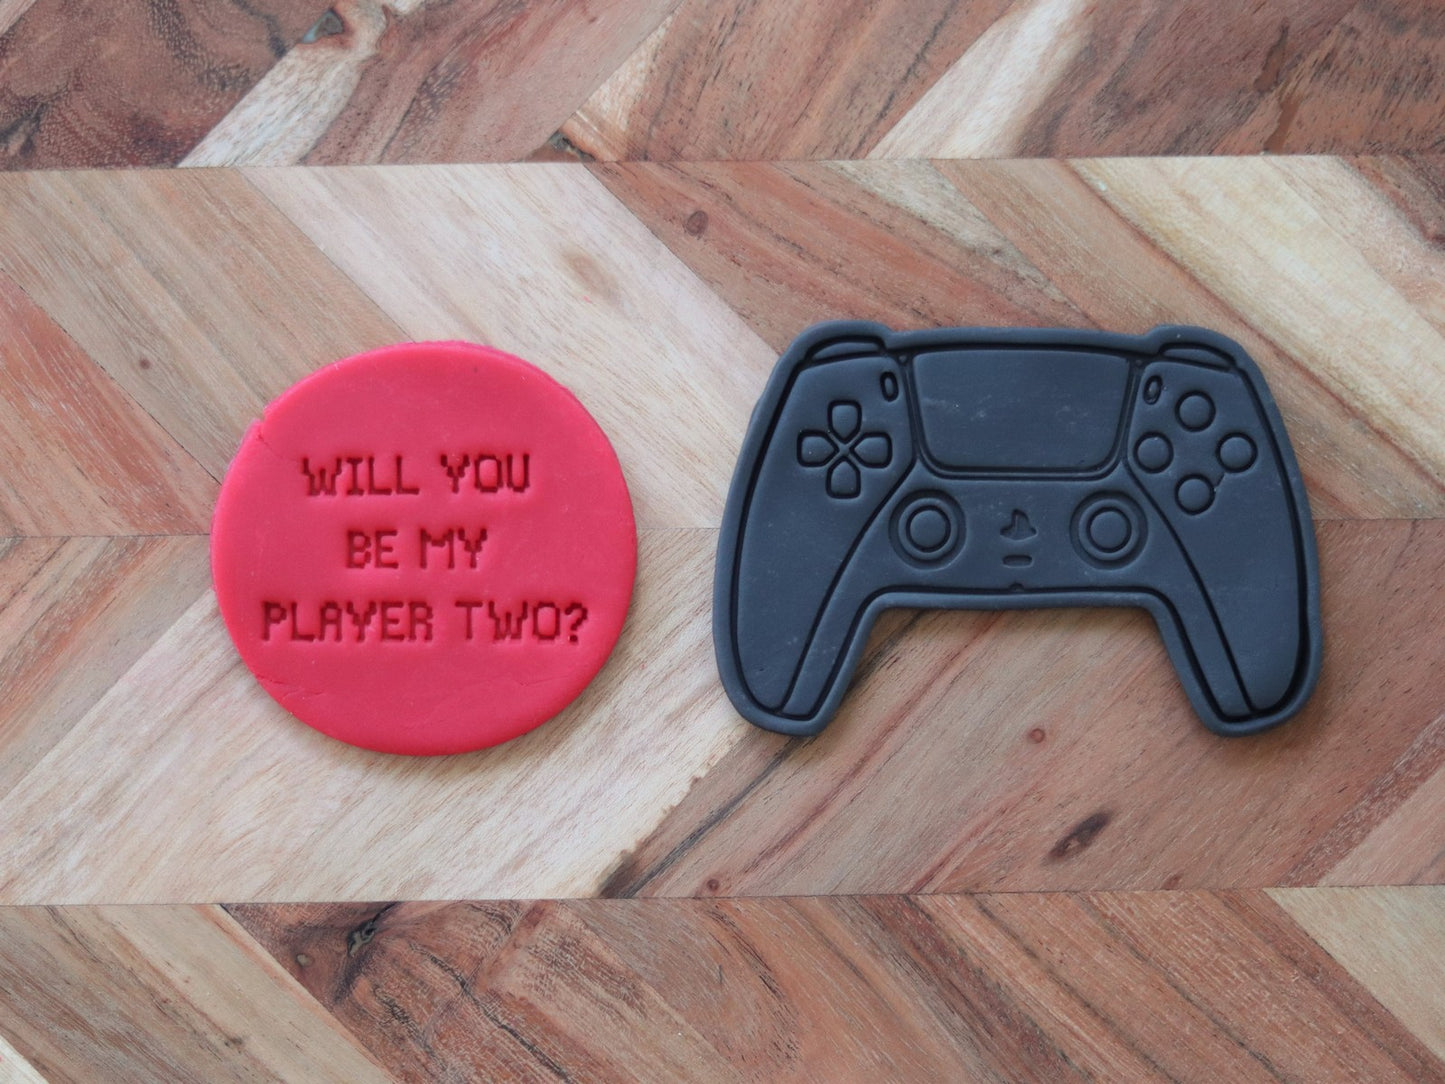 "Will you be my player two?" - 7cm stamp